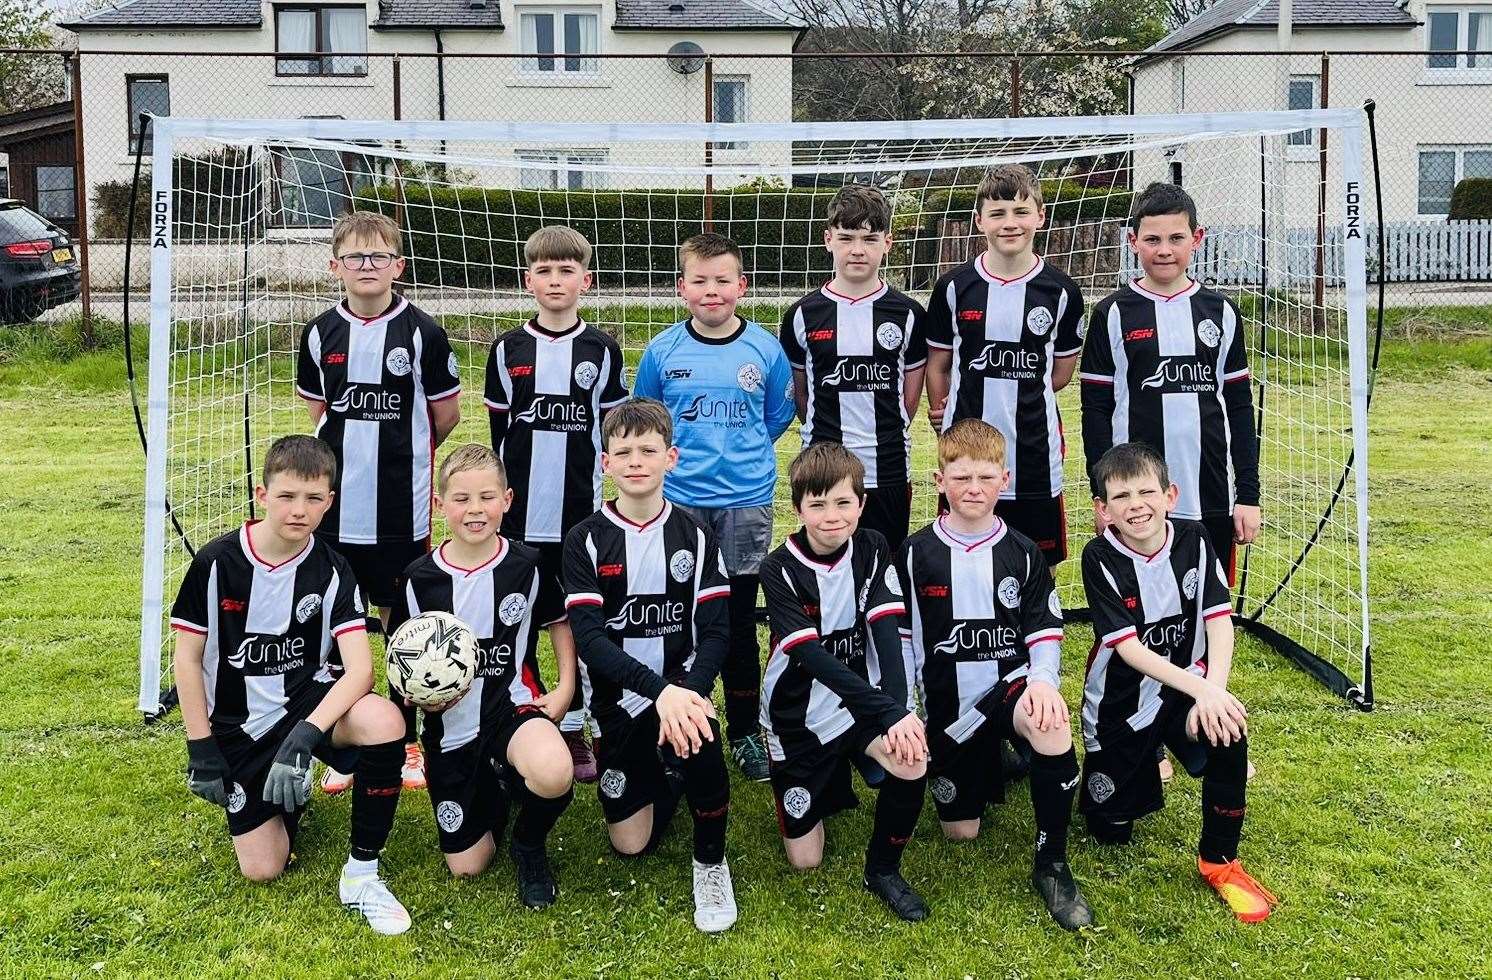 The Caithness United U12 squad who travelled to the festival in Fortrose.